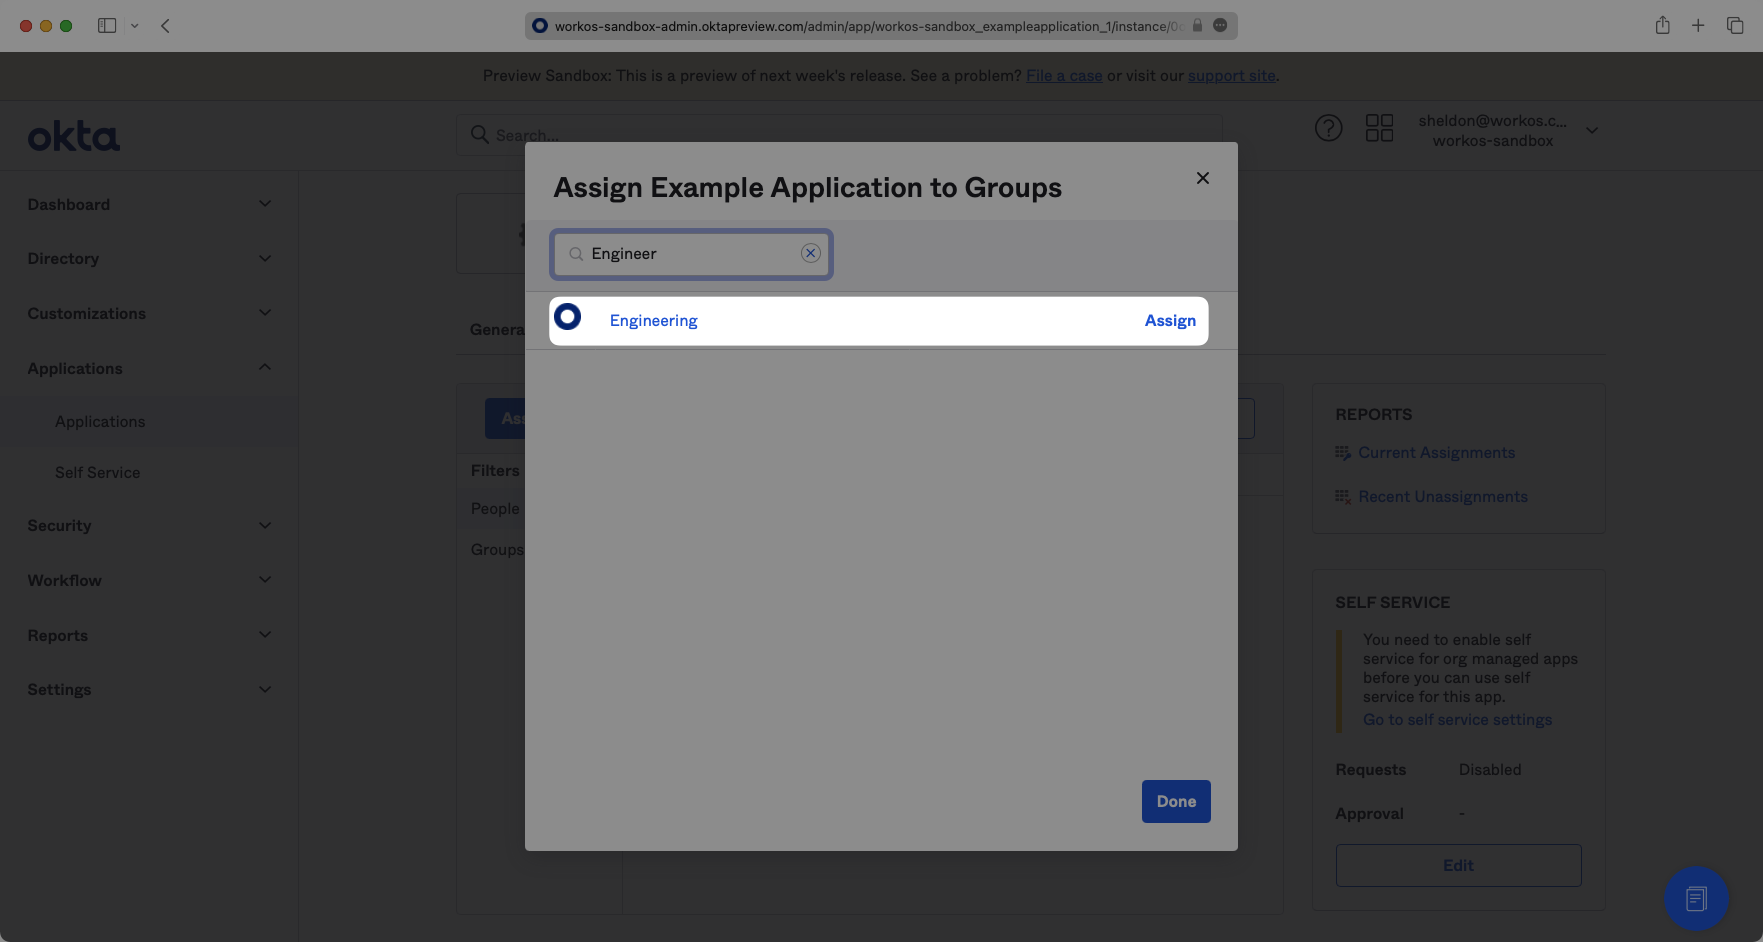 A screenshot showing the selecting of groups to add to the Application in the Okta Dashboard.